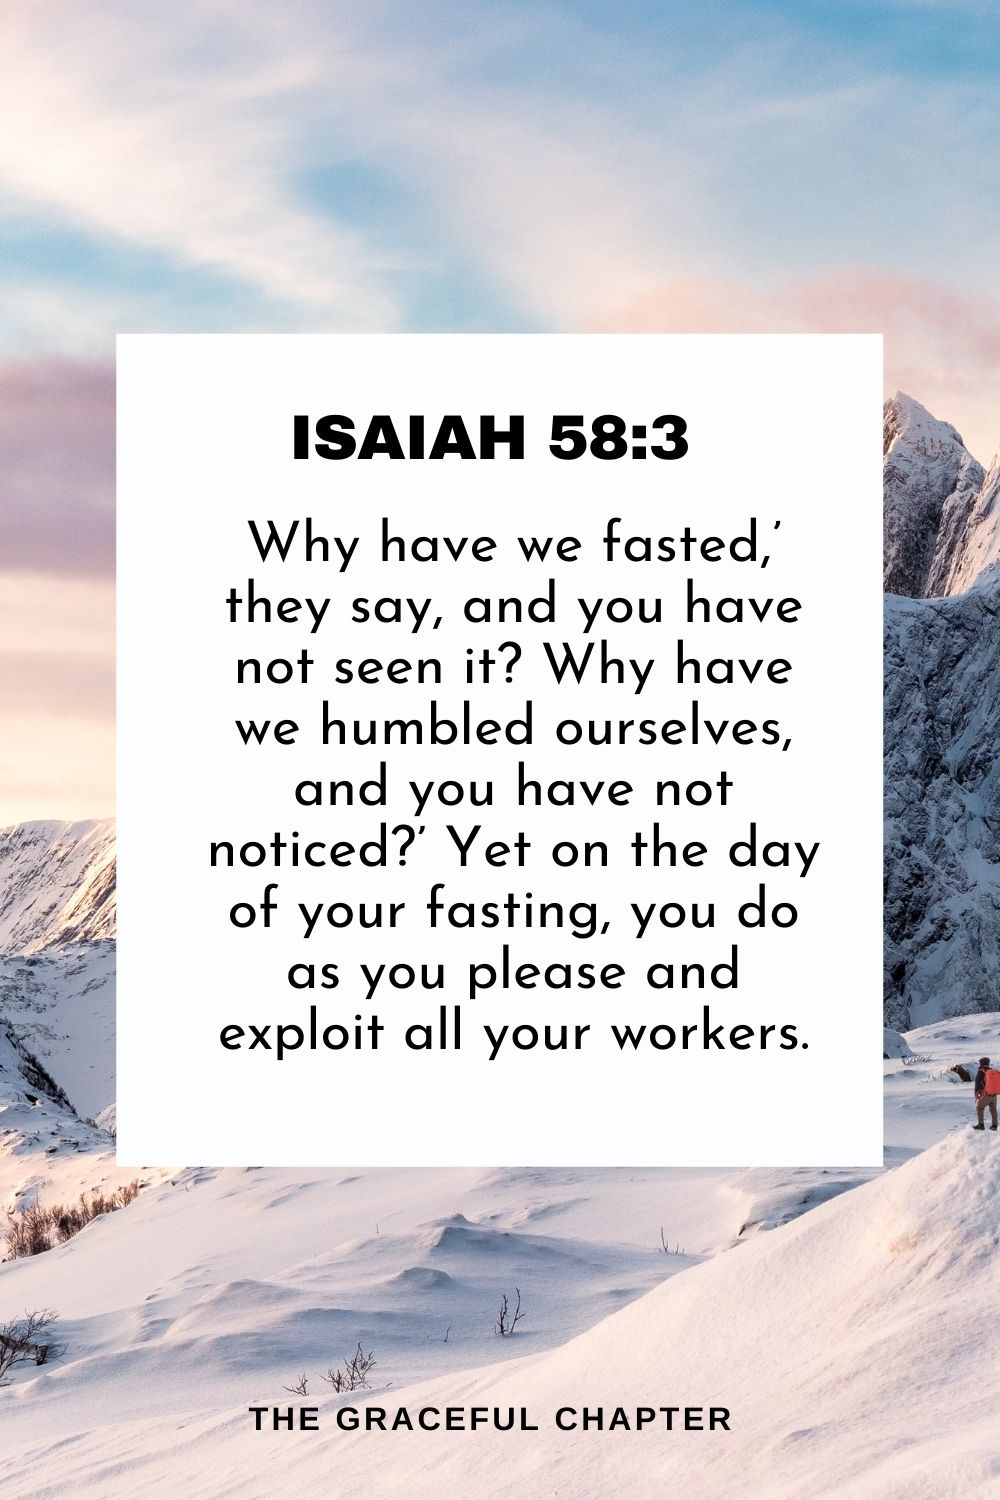 Why have we fasted,’ they say, and you have not seen it? Why have we humbled ourselves, and you have not noticed?’ Yet on the day of your fasting, you do as you please and exploit all your workers. Isaiah 58:3